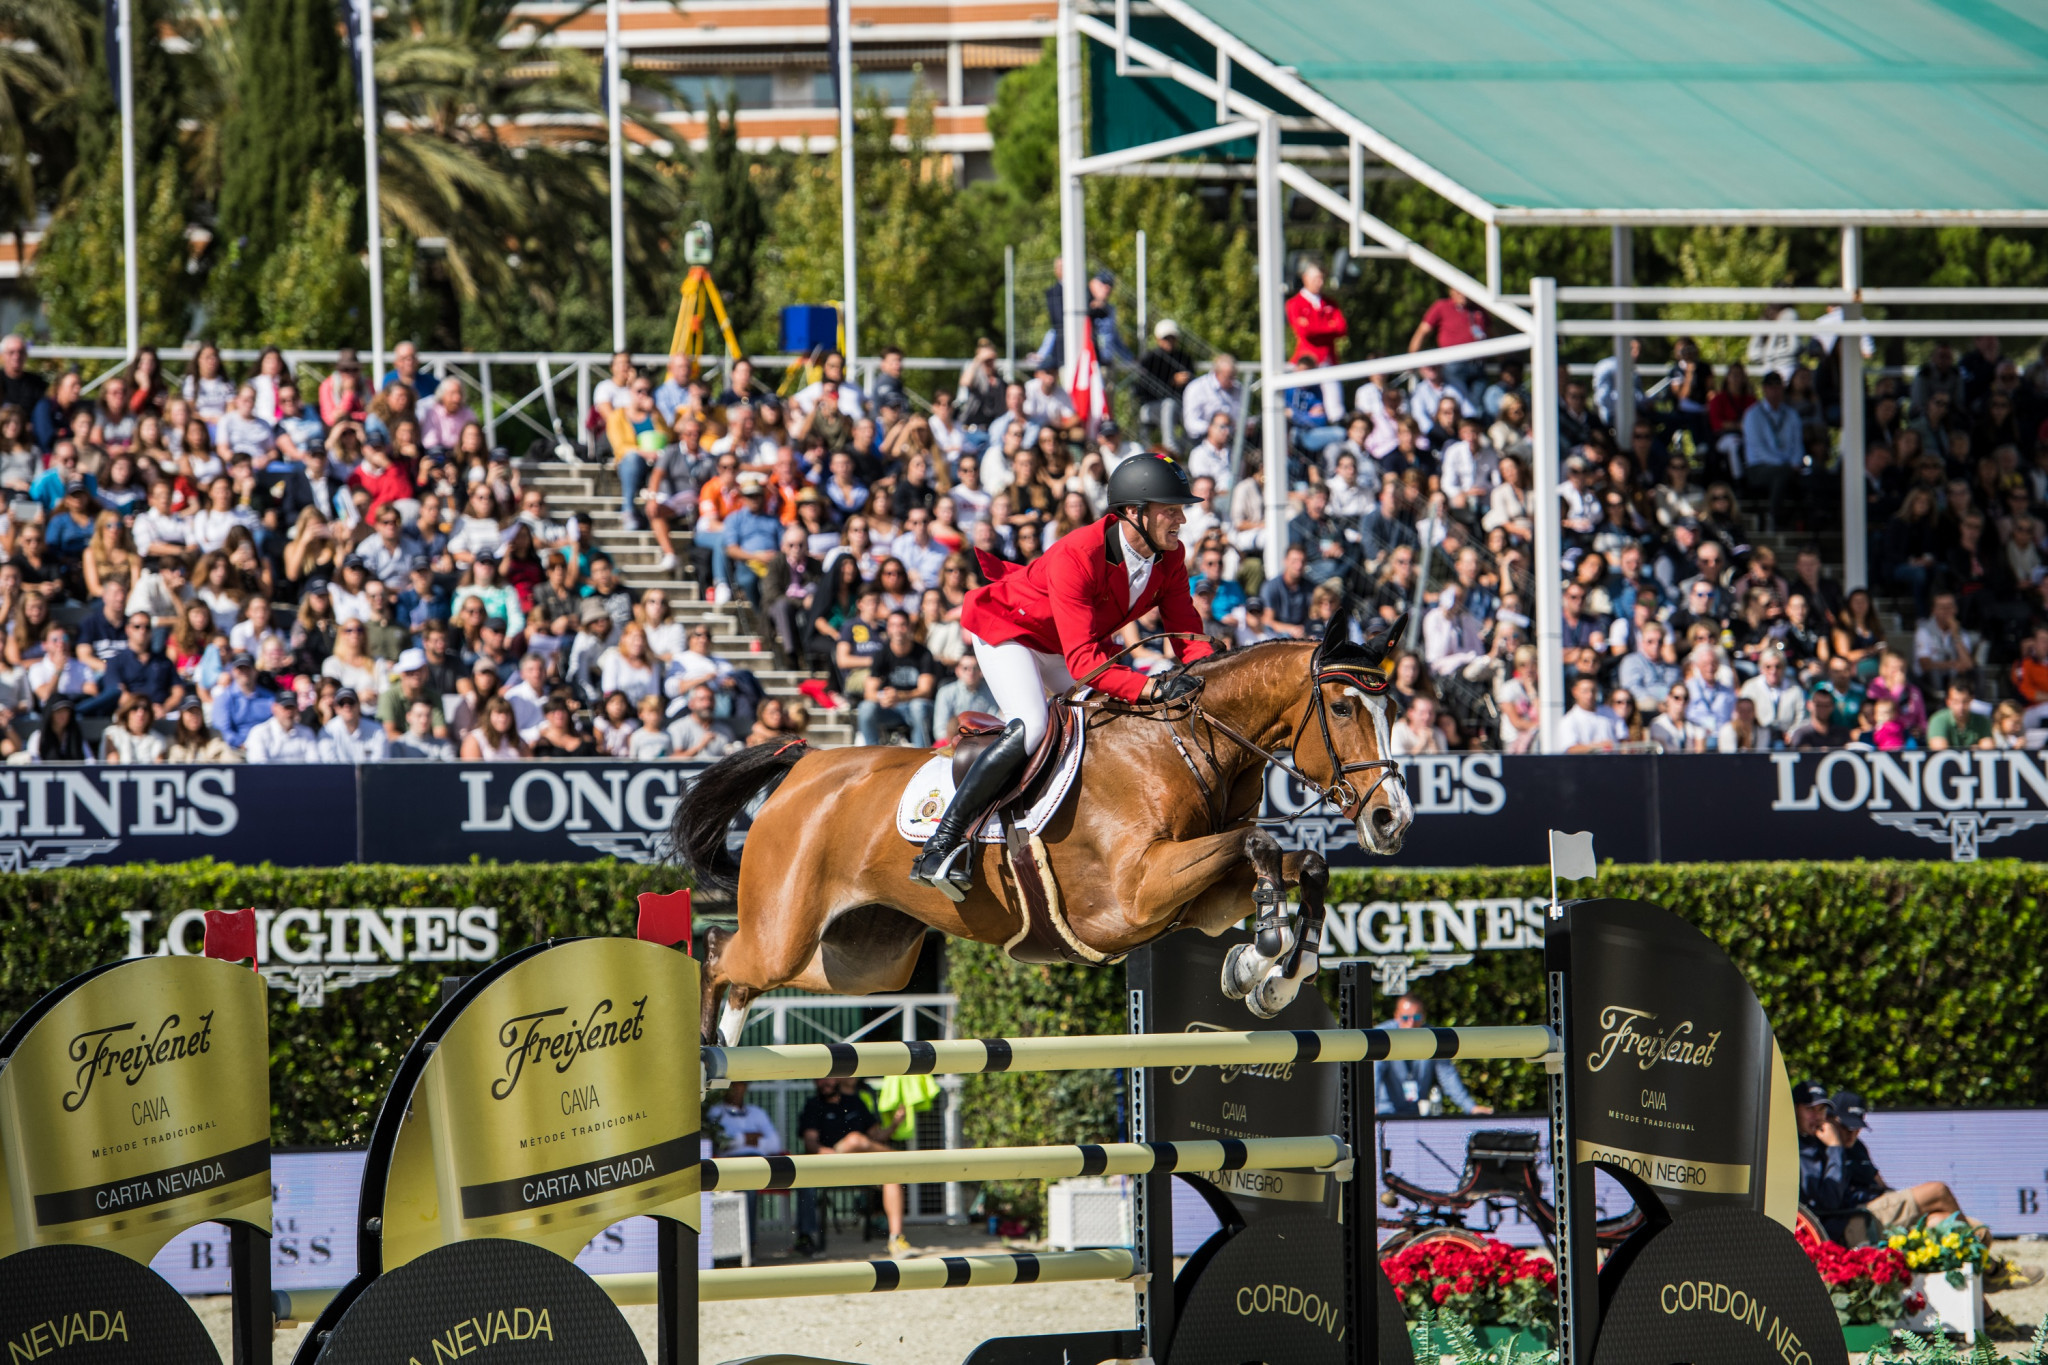 Talks held between the FEI and equestrian delegates resulted in an agreement that the Longines FEI Jumping Nations Cup should be the most important on the calendar ©FEI